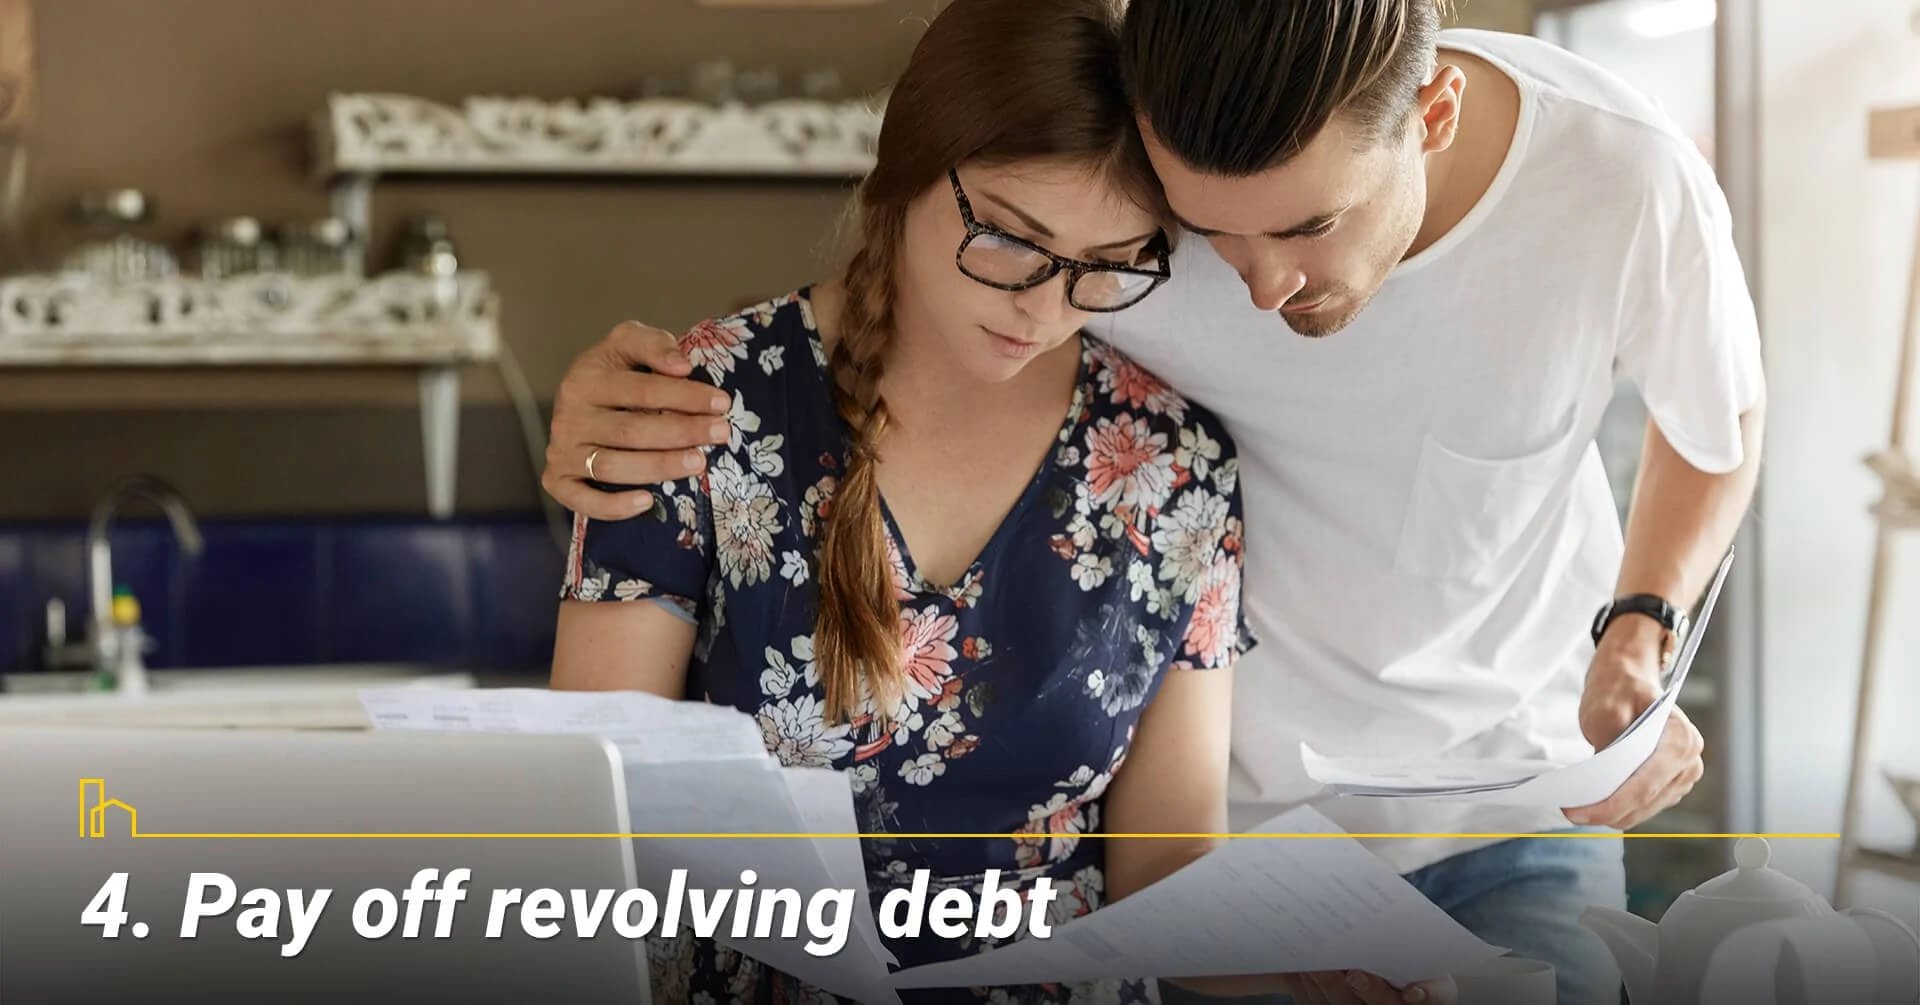 Pay off revolving debt, stay out of revolving debt